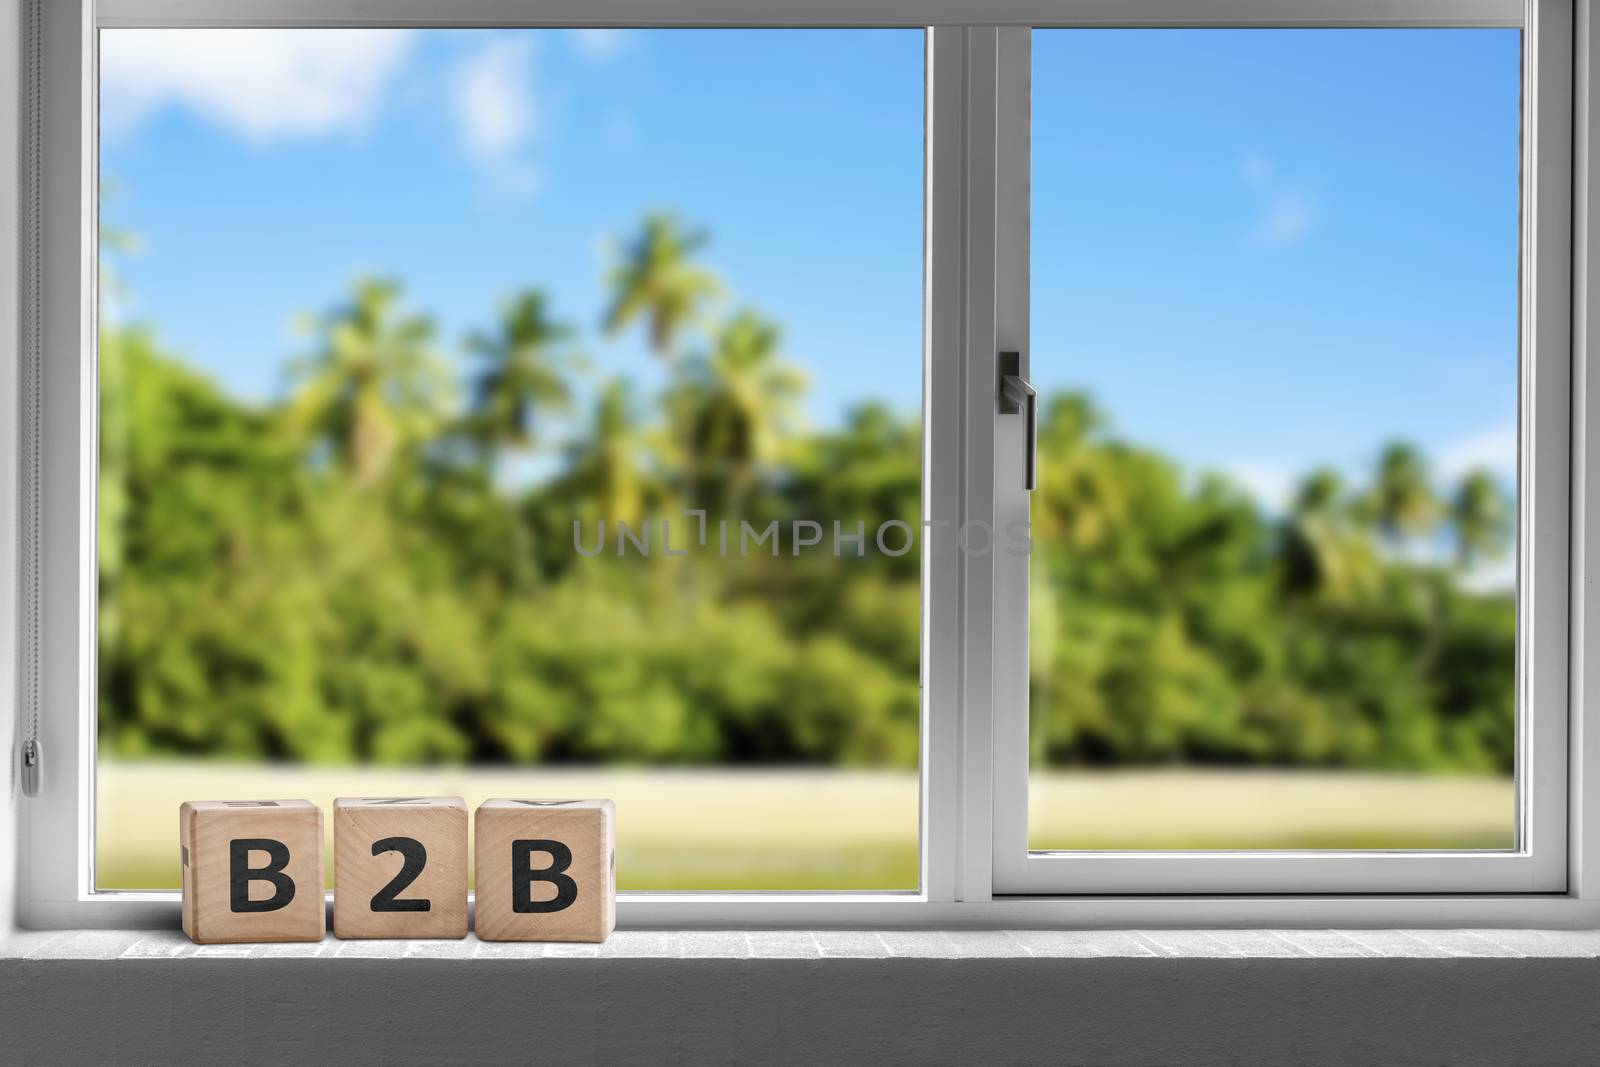 B2B sign in a window on a tropcal island with palm trees under a blue sky